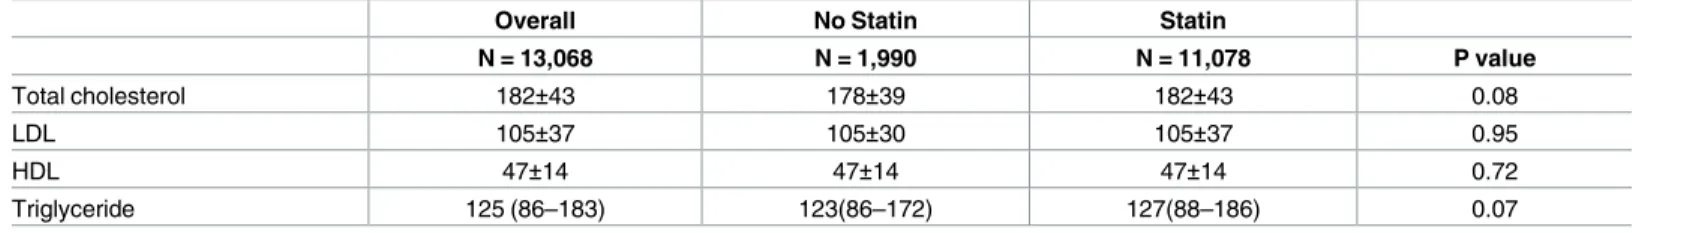 Table 2. Lipid profiles of patients with and without discharge statins.